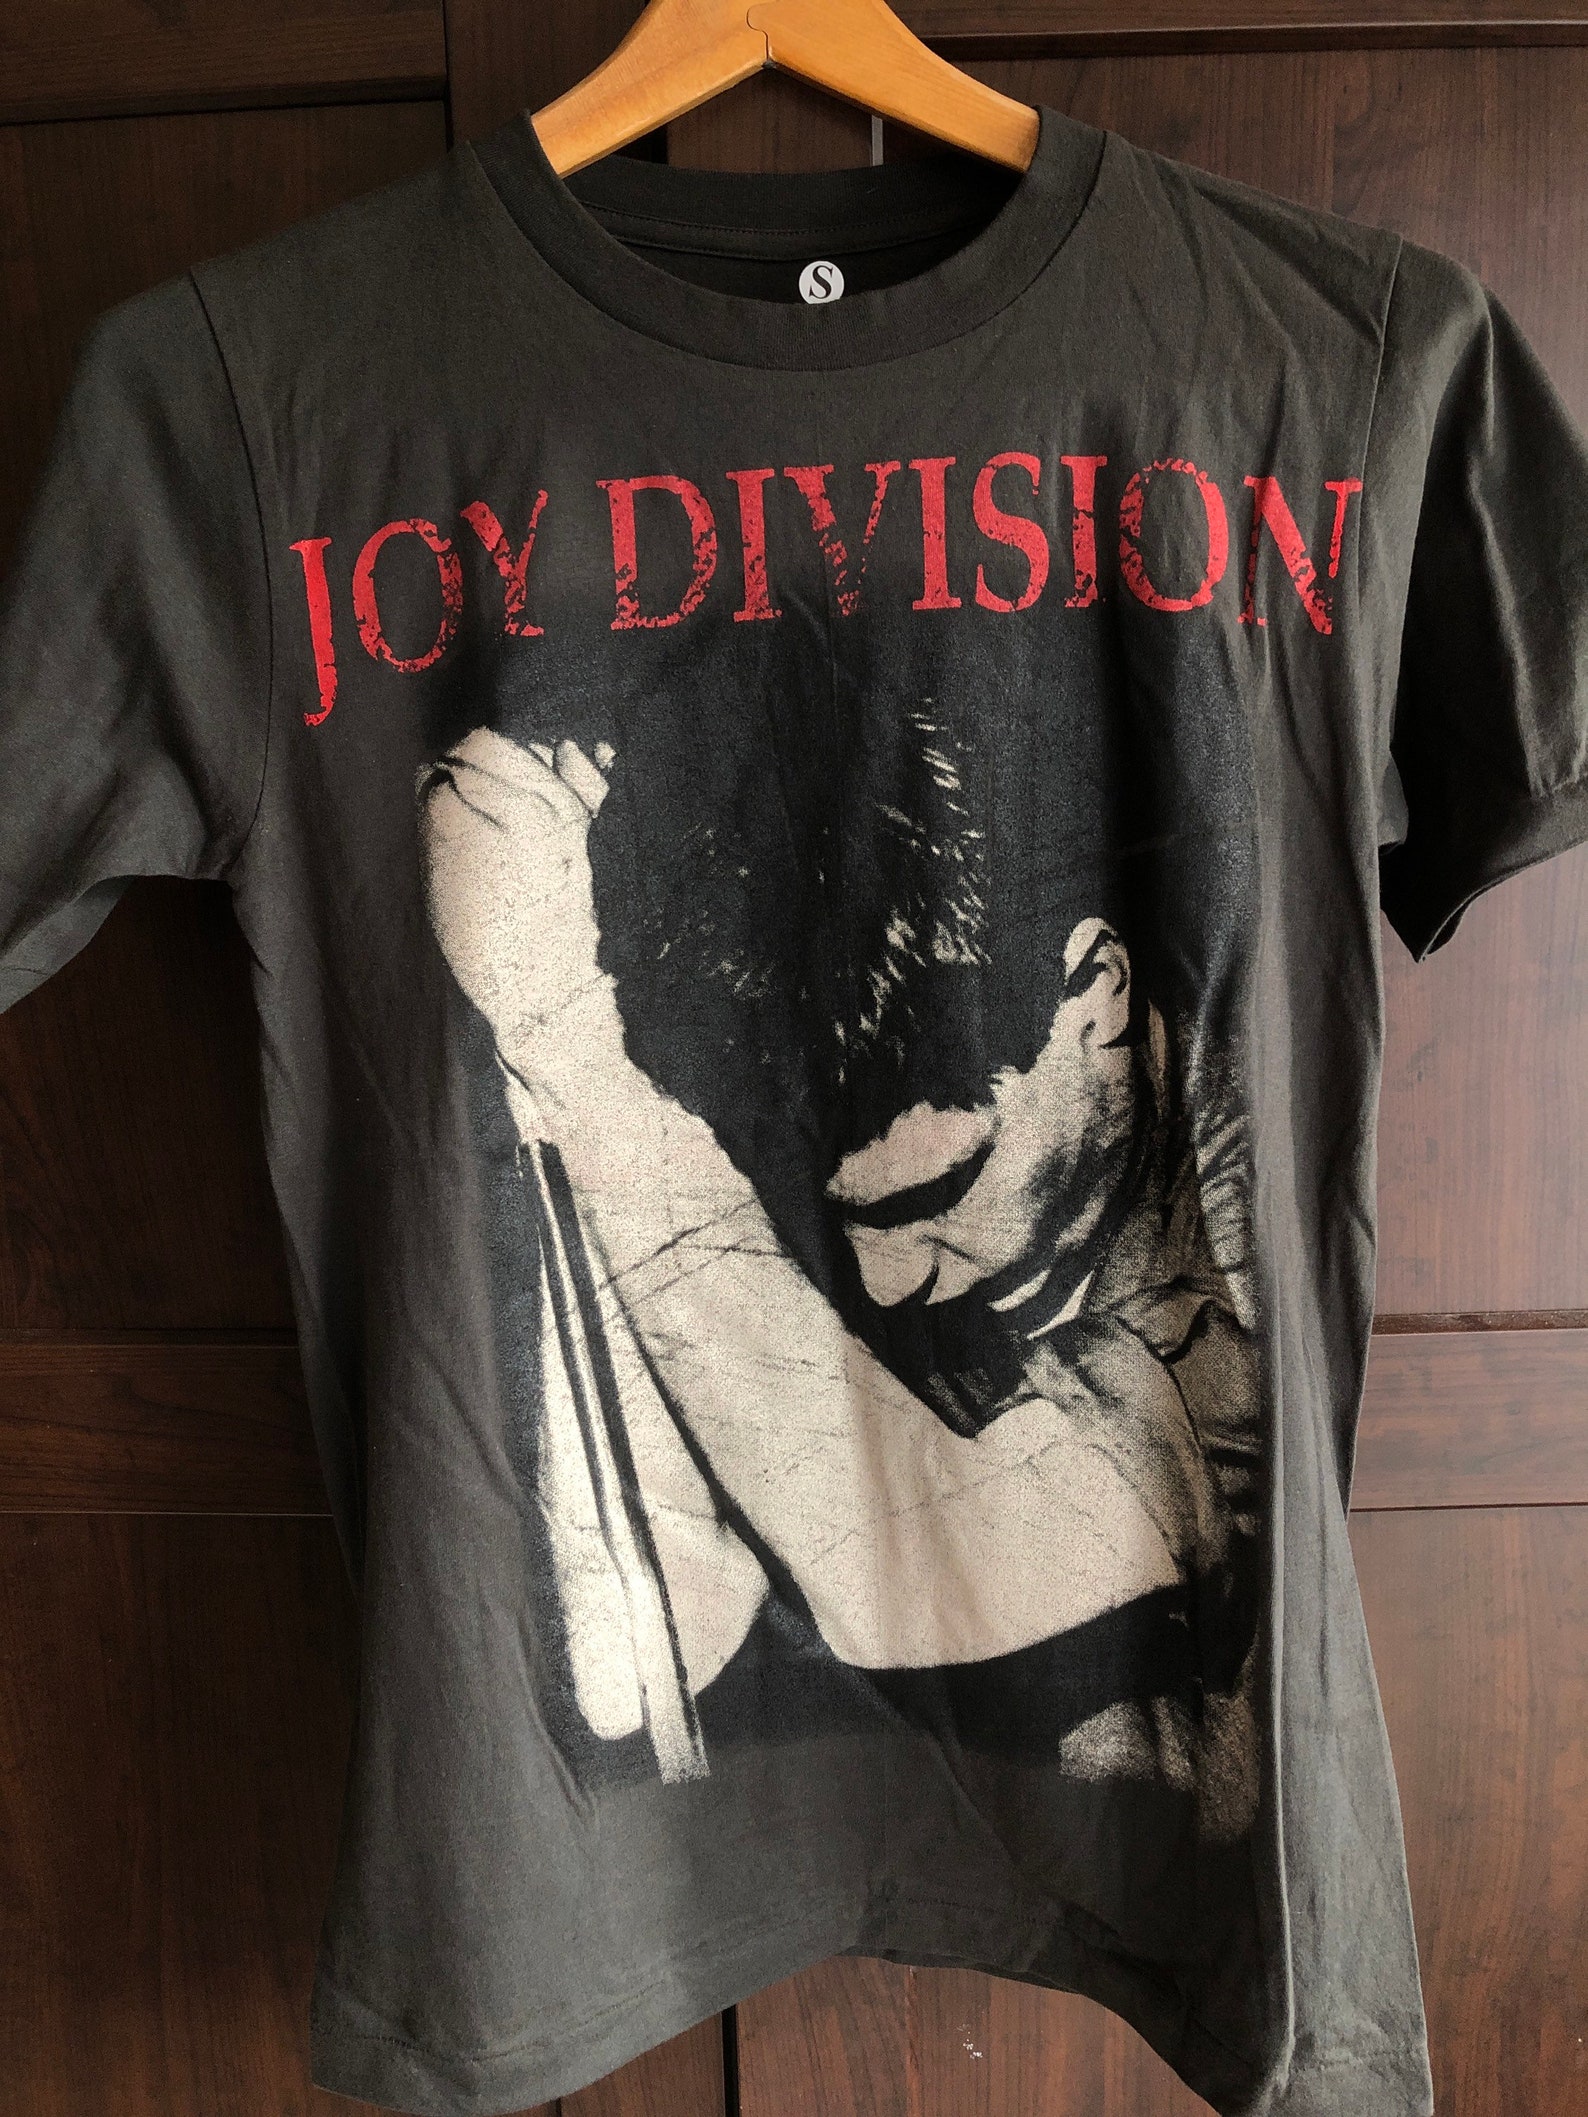 Joy Division Small size Vintage Style band tee band t shirt | Etsy